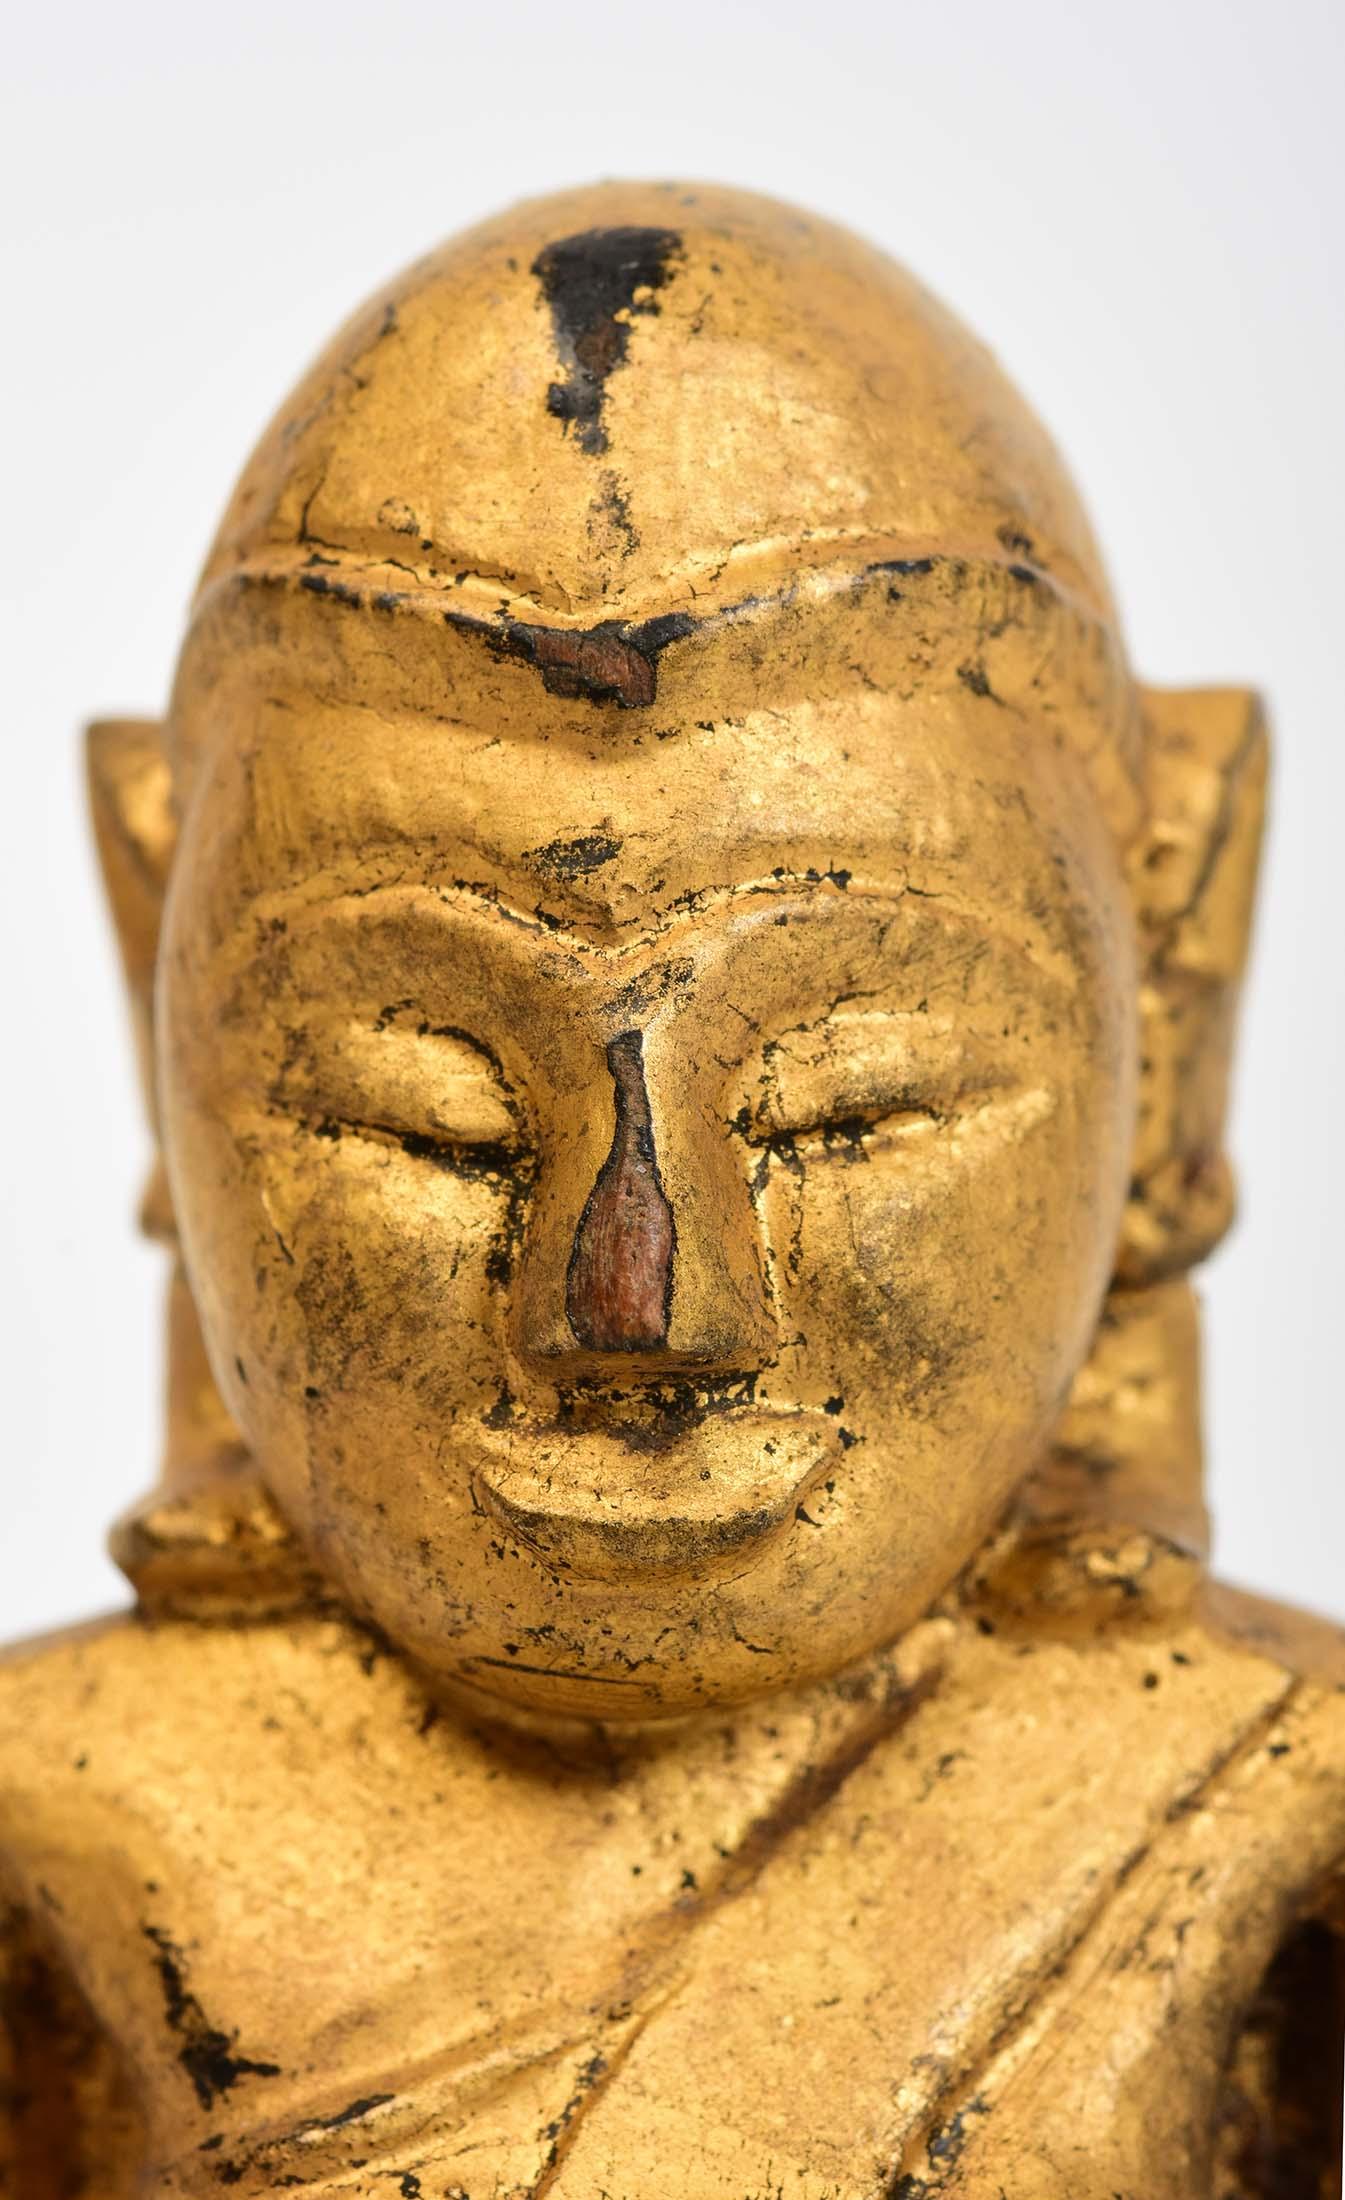 Antique Thai wooden seated Happy Buddha with gilded gold.

Age: Thailand, 19th Century
Size: Height 9.5 C.M. / Width 5 C.M. / Thickness 3.7 C.M.
Condition: Nice condition overall (some expected degradation due to its age).

100% Satisfaction and